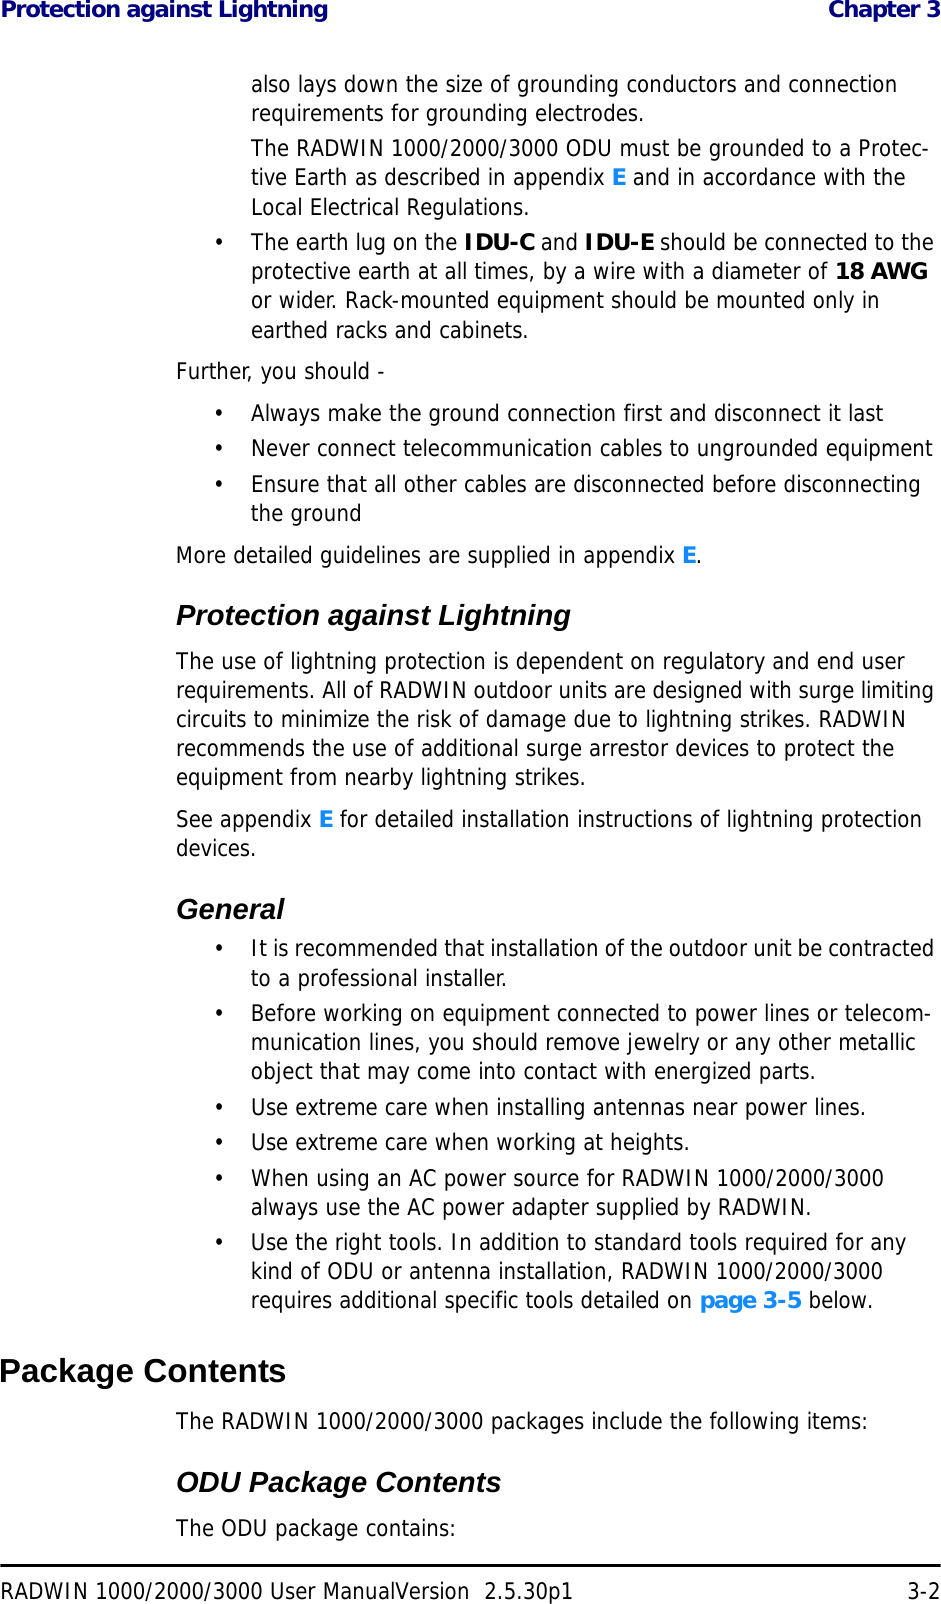 Protection against Lightning  Chapter 3RADWIN 1000/2000/3000 User ManualVersion  2.5.30p1 3-2also lays down the size of grounding conductors and connection requirements for grounding electrodes.The RADWIN 1000/2000/3000 ODU must be grounded to a Protec-tive Earth as described in appendix E and in accordance with the Local Electrical Regulations.• The earth lug on the IDU-C and IDU-E should be connected to the protective earth at all times, by a wire with a diameter of 18 AWG or wider. Rack-mounted equipment should be mounted only in earthed racks and cabinets.Further, you should -• Always make the ground connection first and disconnect it last• Never connect telecommunication cables to ungrounded equipment• Ensure that all other cables are disconnected before disconnecting the groundMore detailed guidelines are supplied in appendix E.Protection against LightningThe use of lightning protection is dependent on regulatory and end user requirements. All of RADWIN outdoor units are designed with surge limiting circuits to minimize the risk of damage due to lightning strikes. RADWIN recommends the use of additional surge arrestor devices to protect the equipment from nearby lightning strikes.See appendix E for detailed installation instructions of lightning protection devices.General• It is recommended that installation of the outdoor unit be contracted to a professional installer.• Before working on equipment connected to power lines or telecom-munication lines, you should remove jewelry or any other metallic object that may come into contact with energized parts.• Use extreme care when installing antennas near power lines.• Use extreme care when working at heights.• When using an AC power source for RADWIN 1000/2000/3000 always use the AC power adapter supplied by RADWIN.• Use the right tools. In addition to standard tools required for any kind of ODU or antenna installation, RADWIN 1000/2000/3000 requires additional specific tools detailed on page 3-5 below.Package ContentsThe RADWIN 1000/2000/3000 packages include the following items:ODU Package ContentsThe ODU package contains: